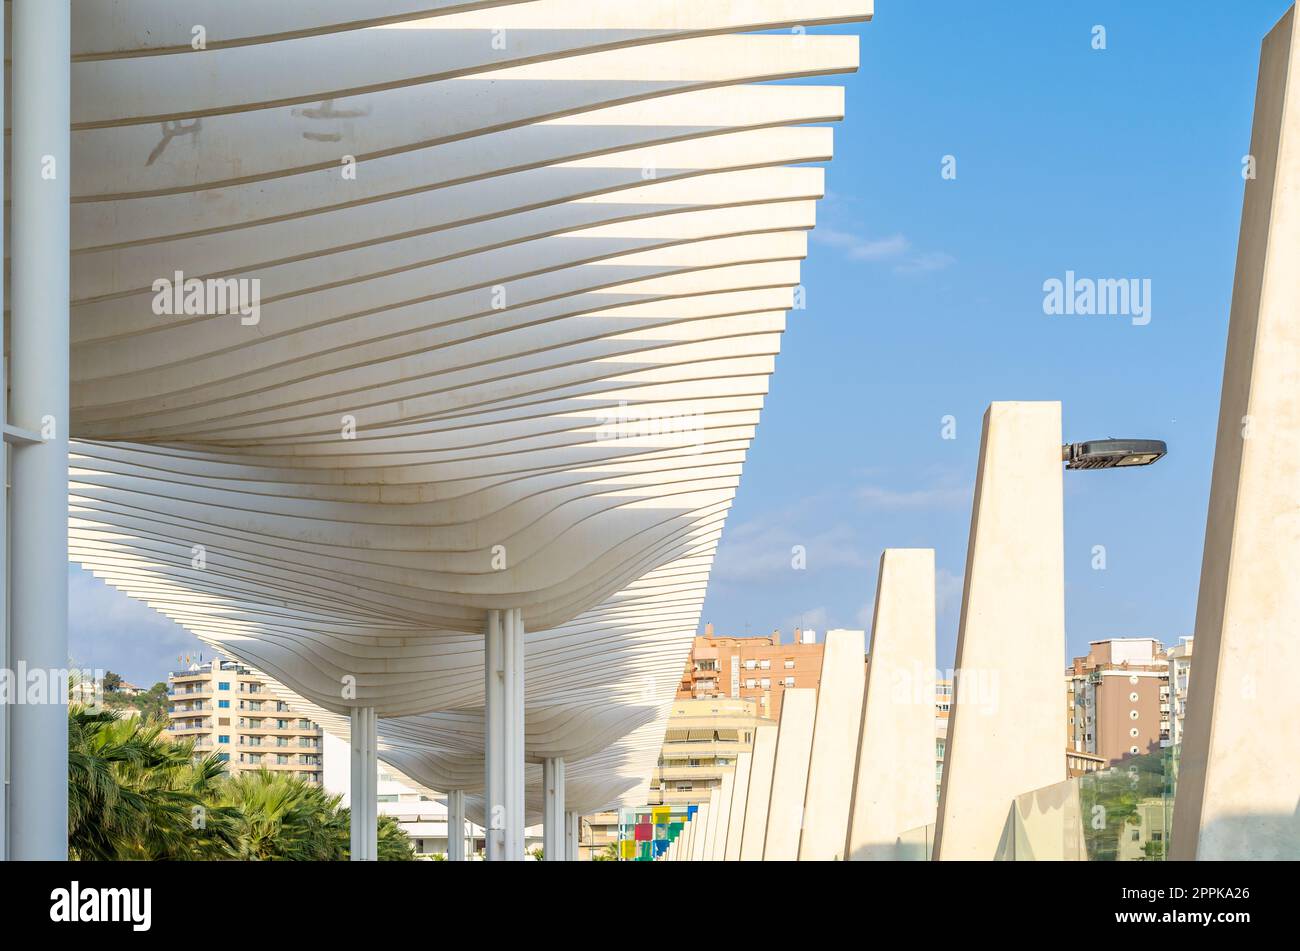 MALAGA, SPAIN - OCTOBER 12, 2021: Modern architecture, detail of the pergola on the seafront in Malaga, Spain, inaugurated in 2011 Stock Photo